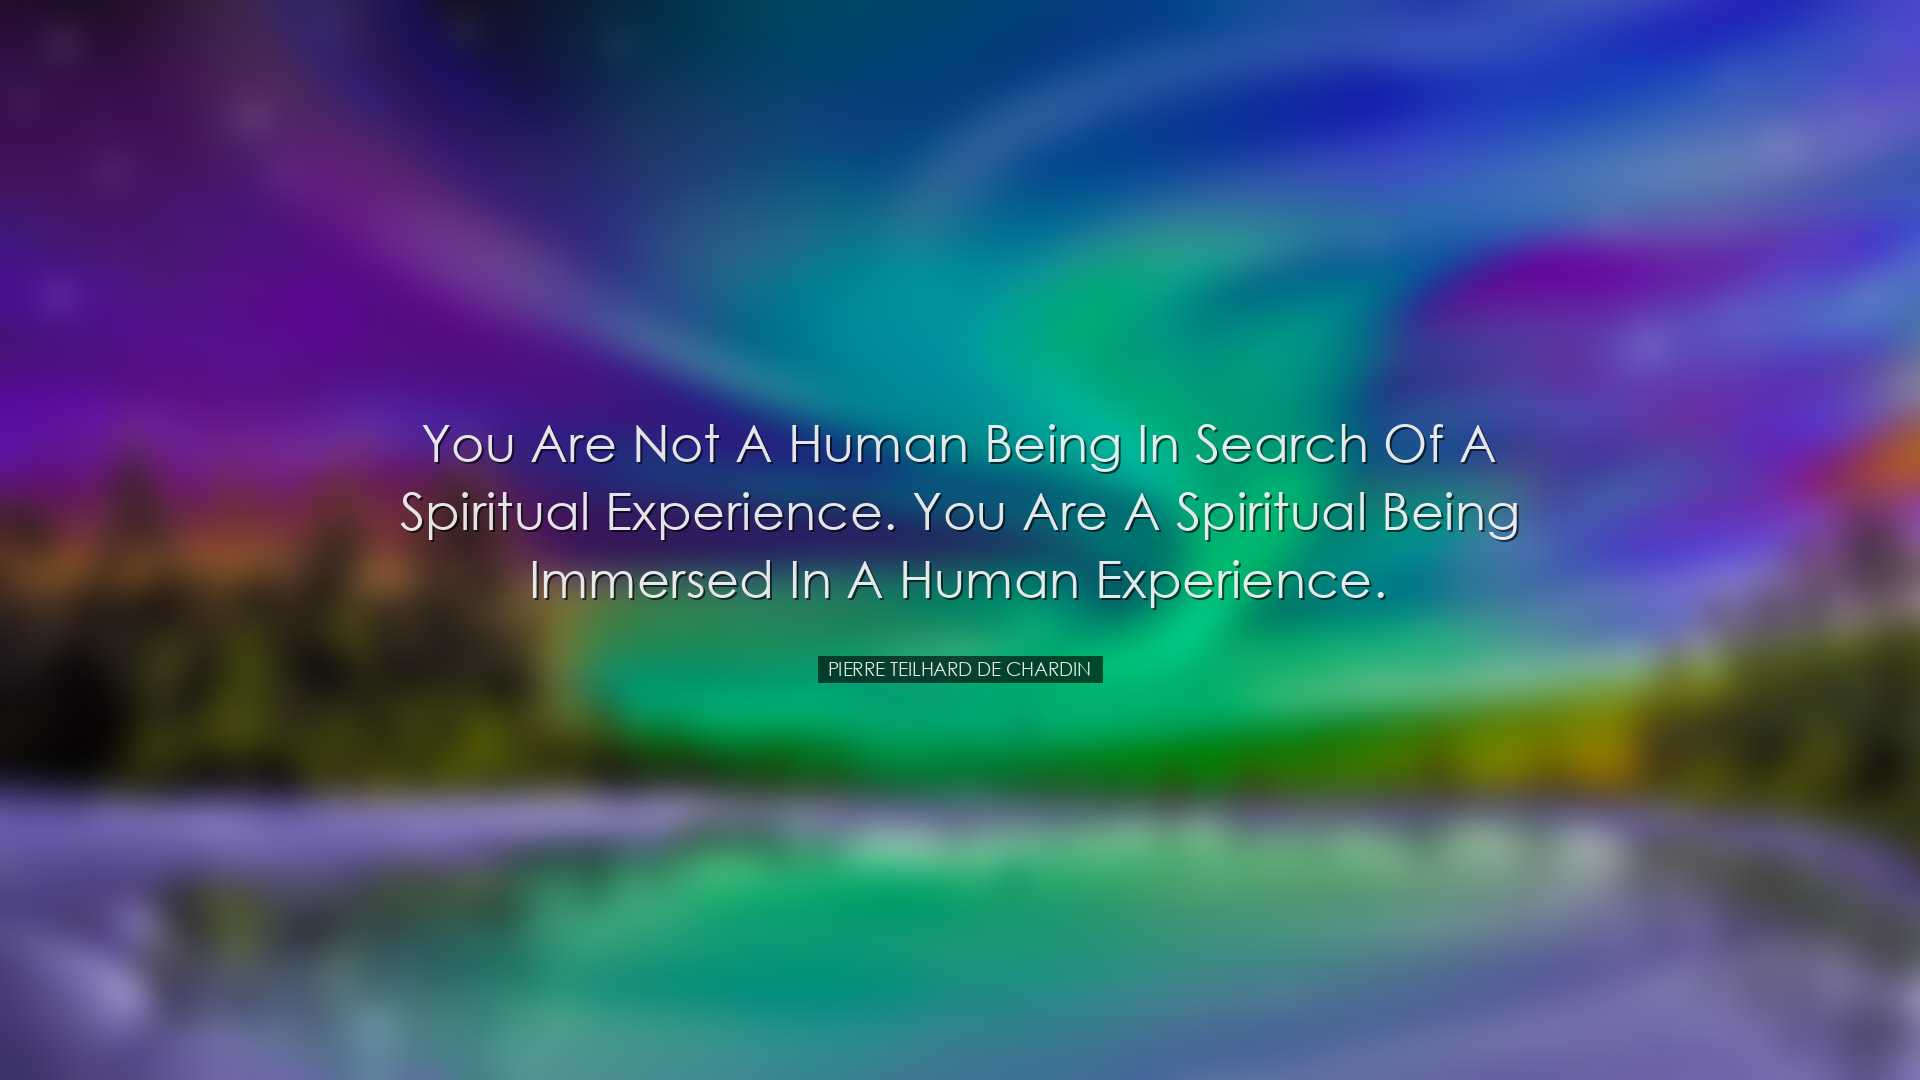 You are not a human being in search of a spiritual experience. You